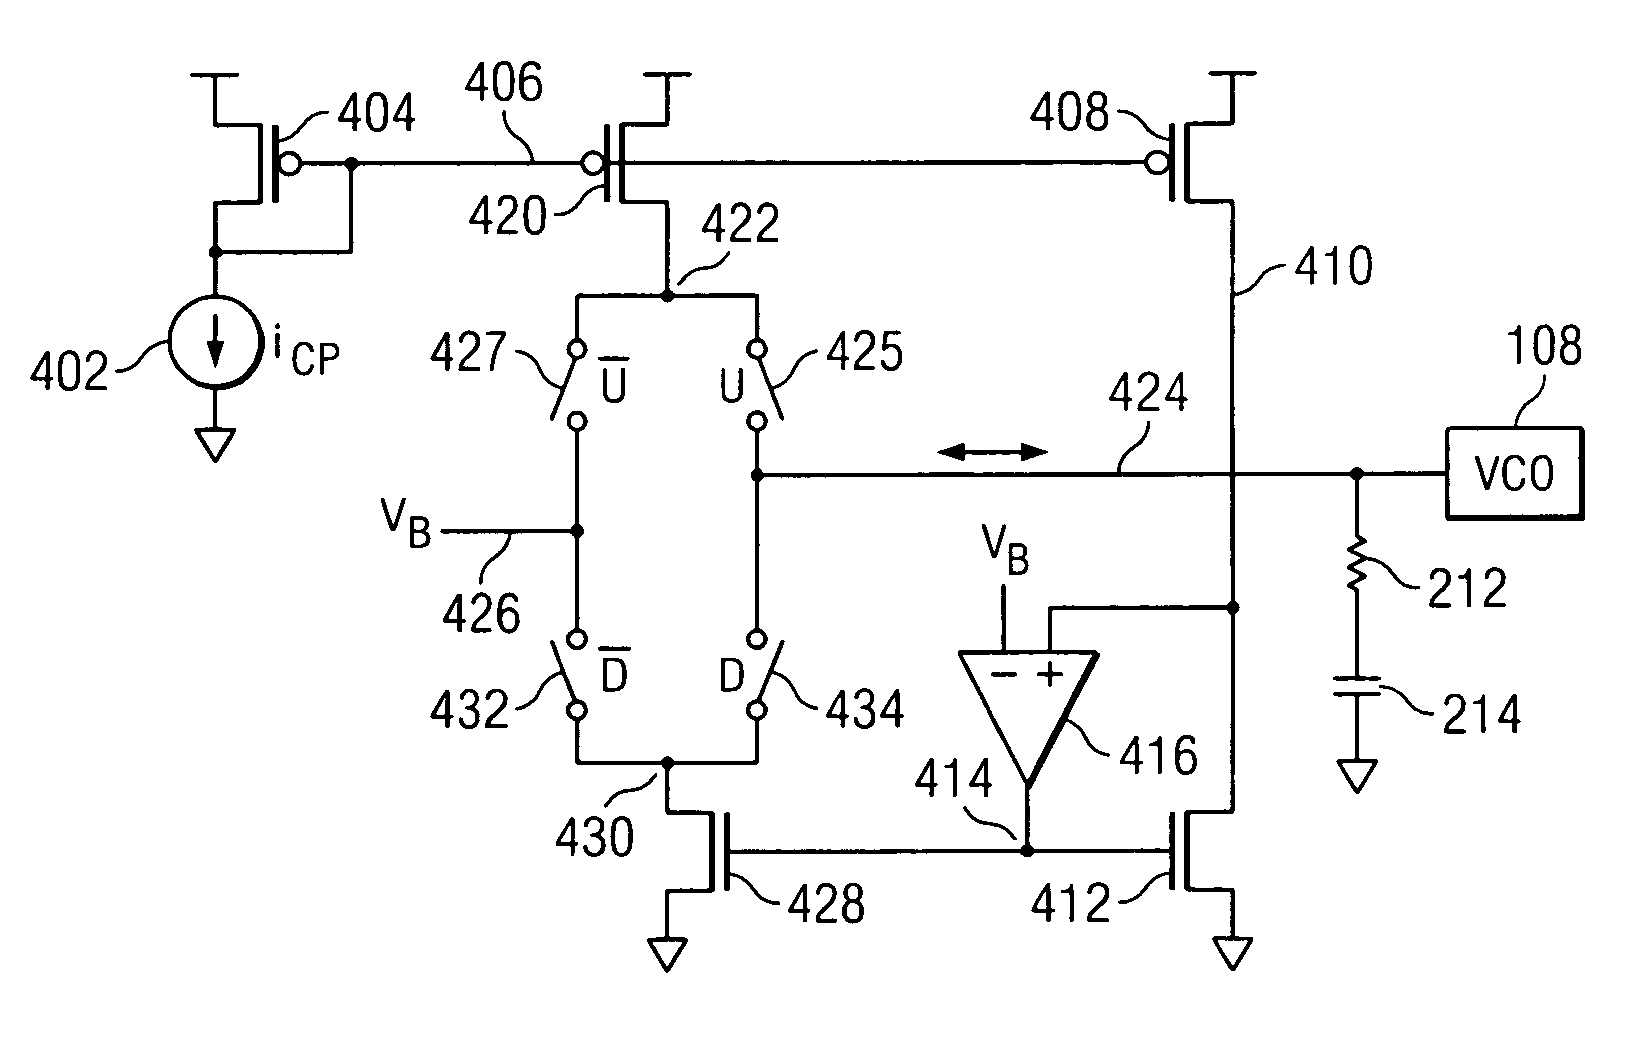 Integrated PLL loop filter and charge pump